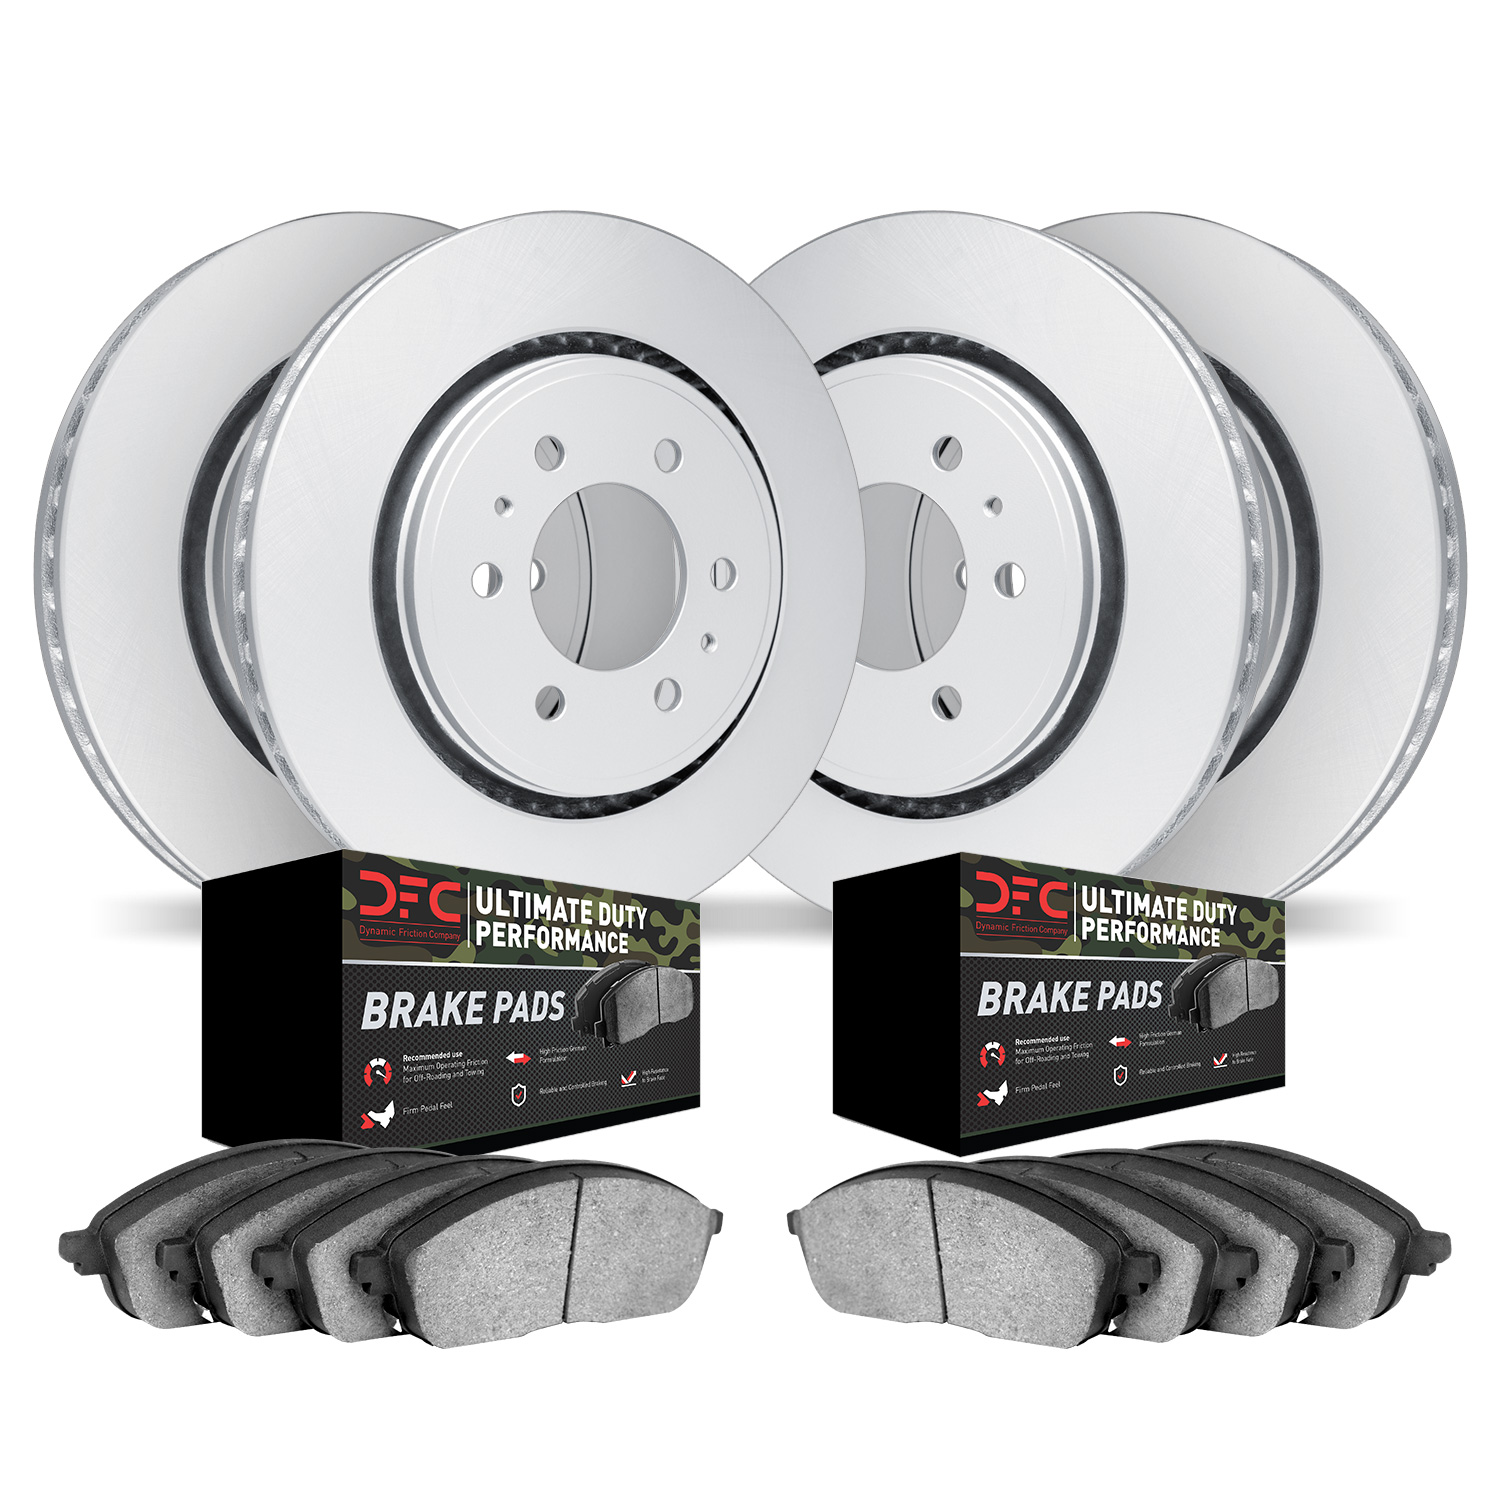 4404-48009 Geospec Brake Rotors with Ultimate-Duty Brake Pads Kit, 2009-2014 GM, Position: Front and Rear